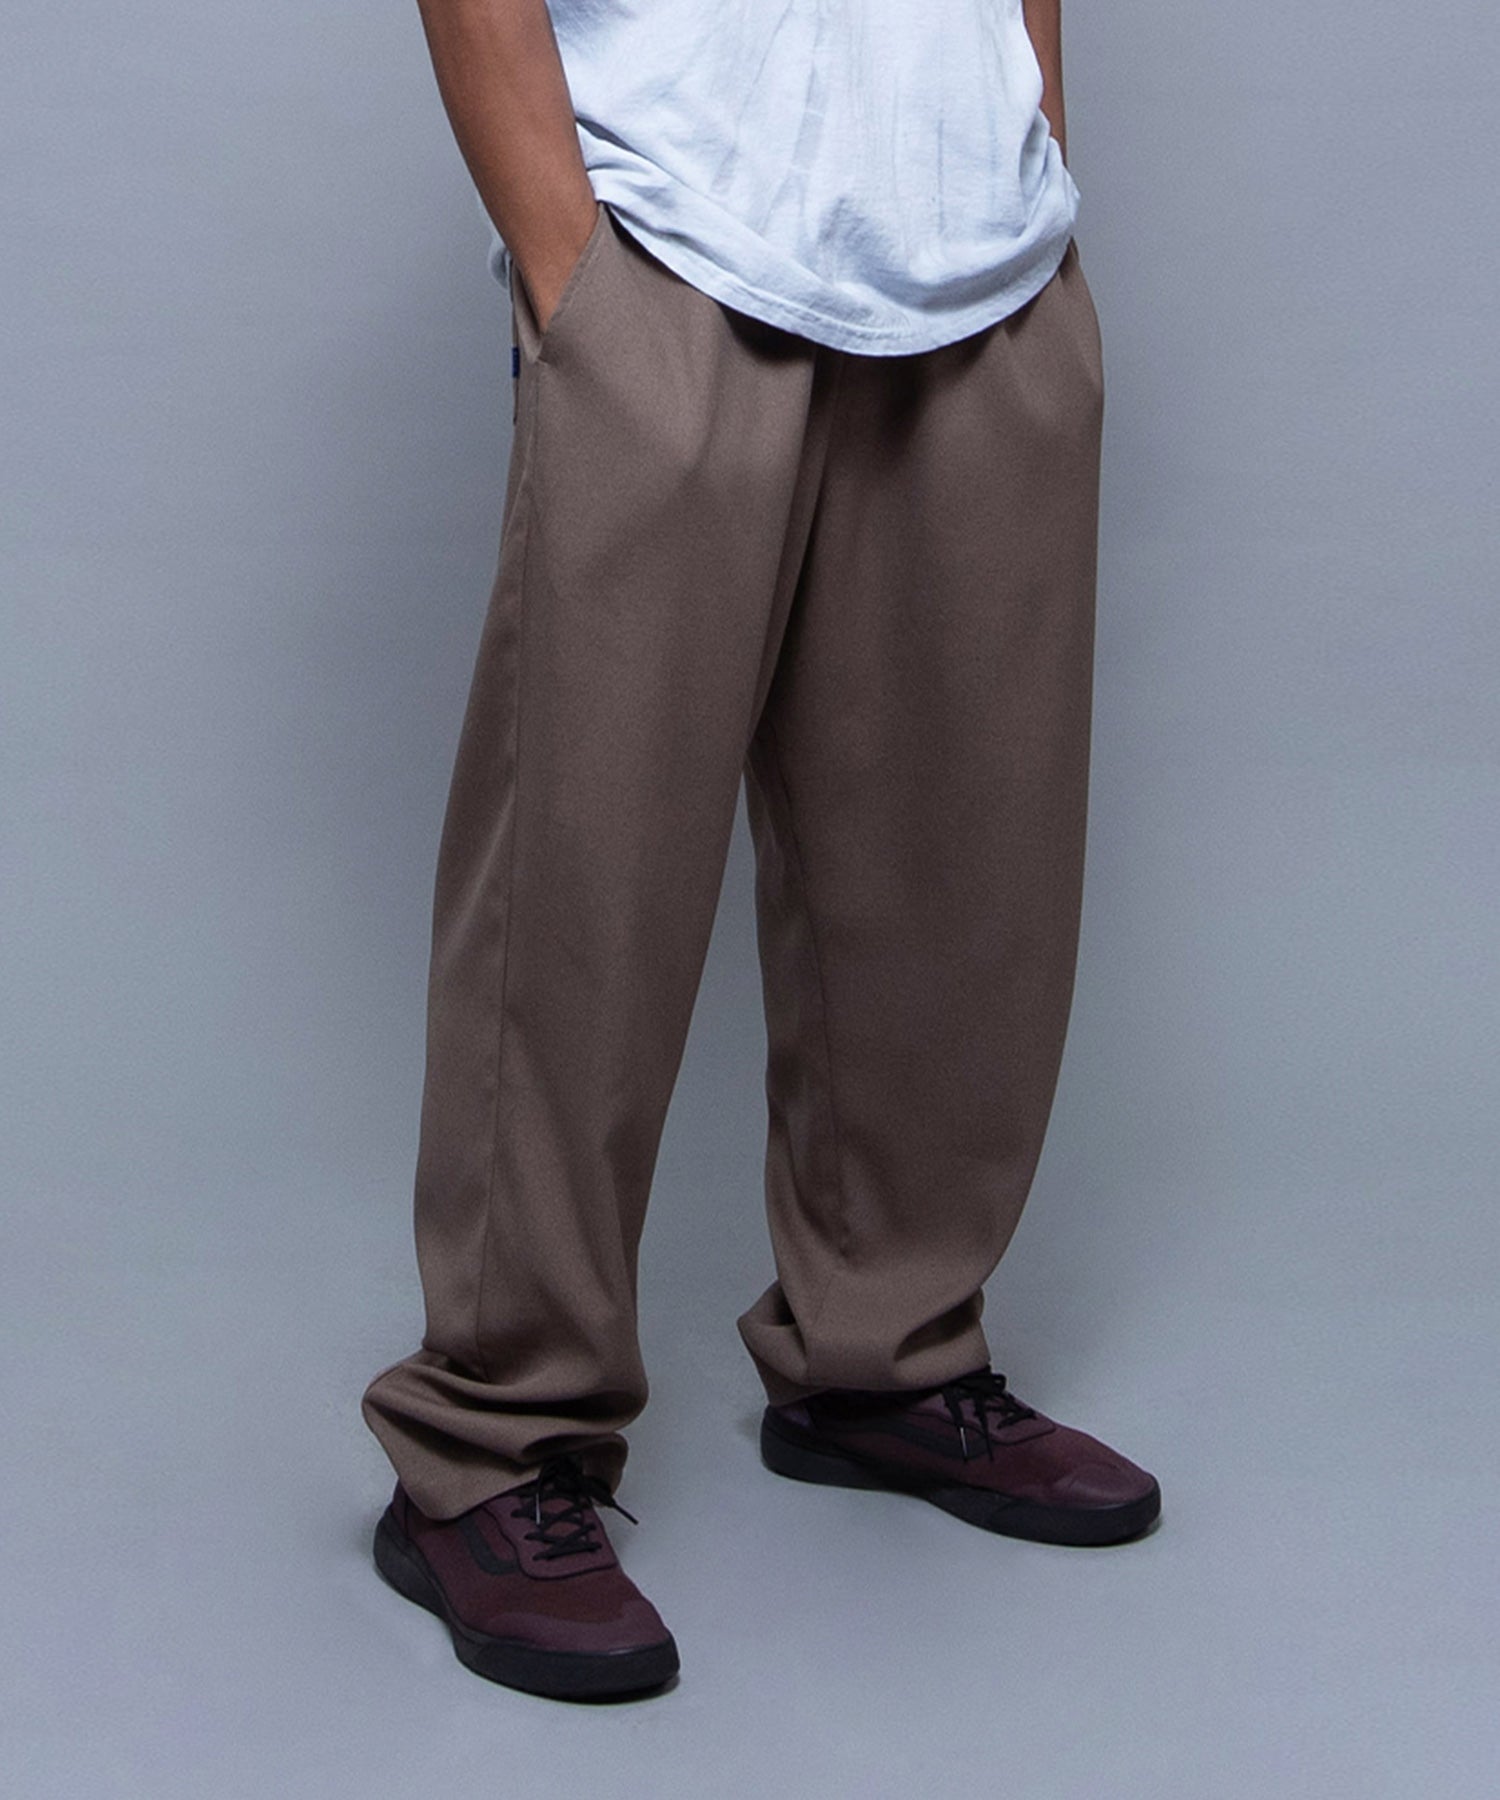 WRINKLE RESISTANT TWILL CHEF PANTS LS221206 BROWN – LFYT